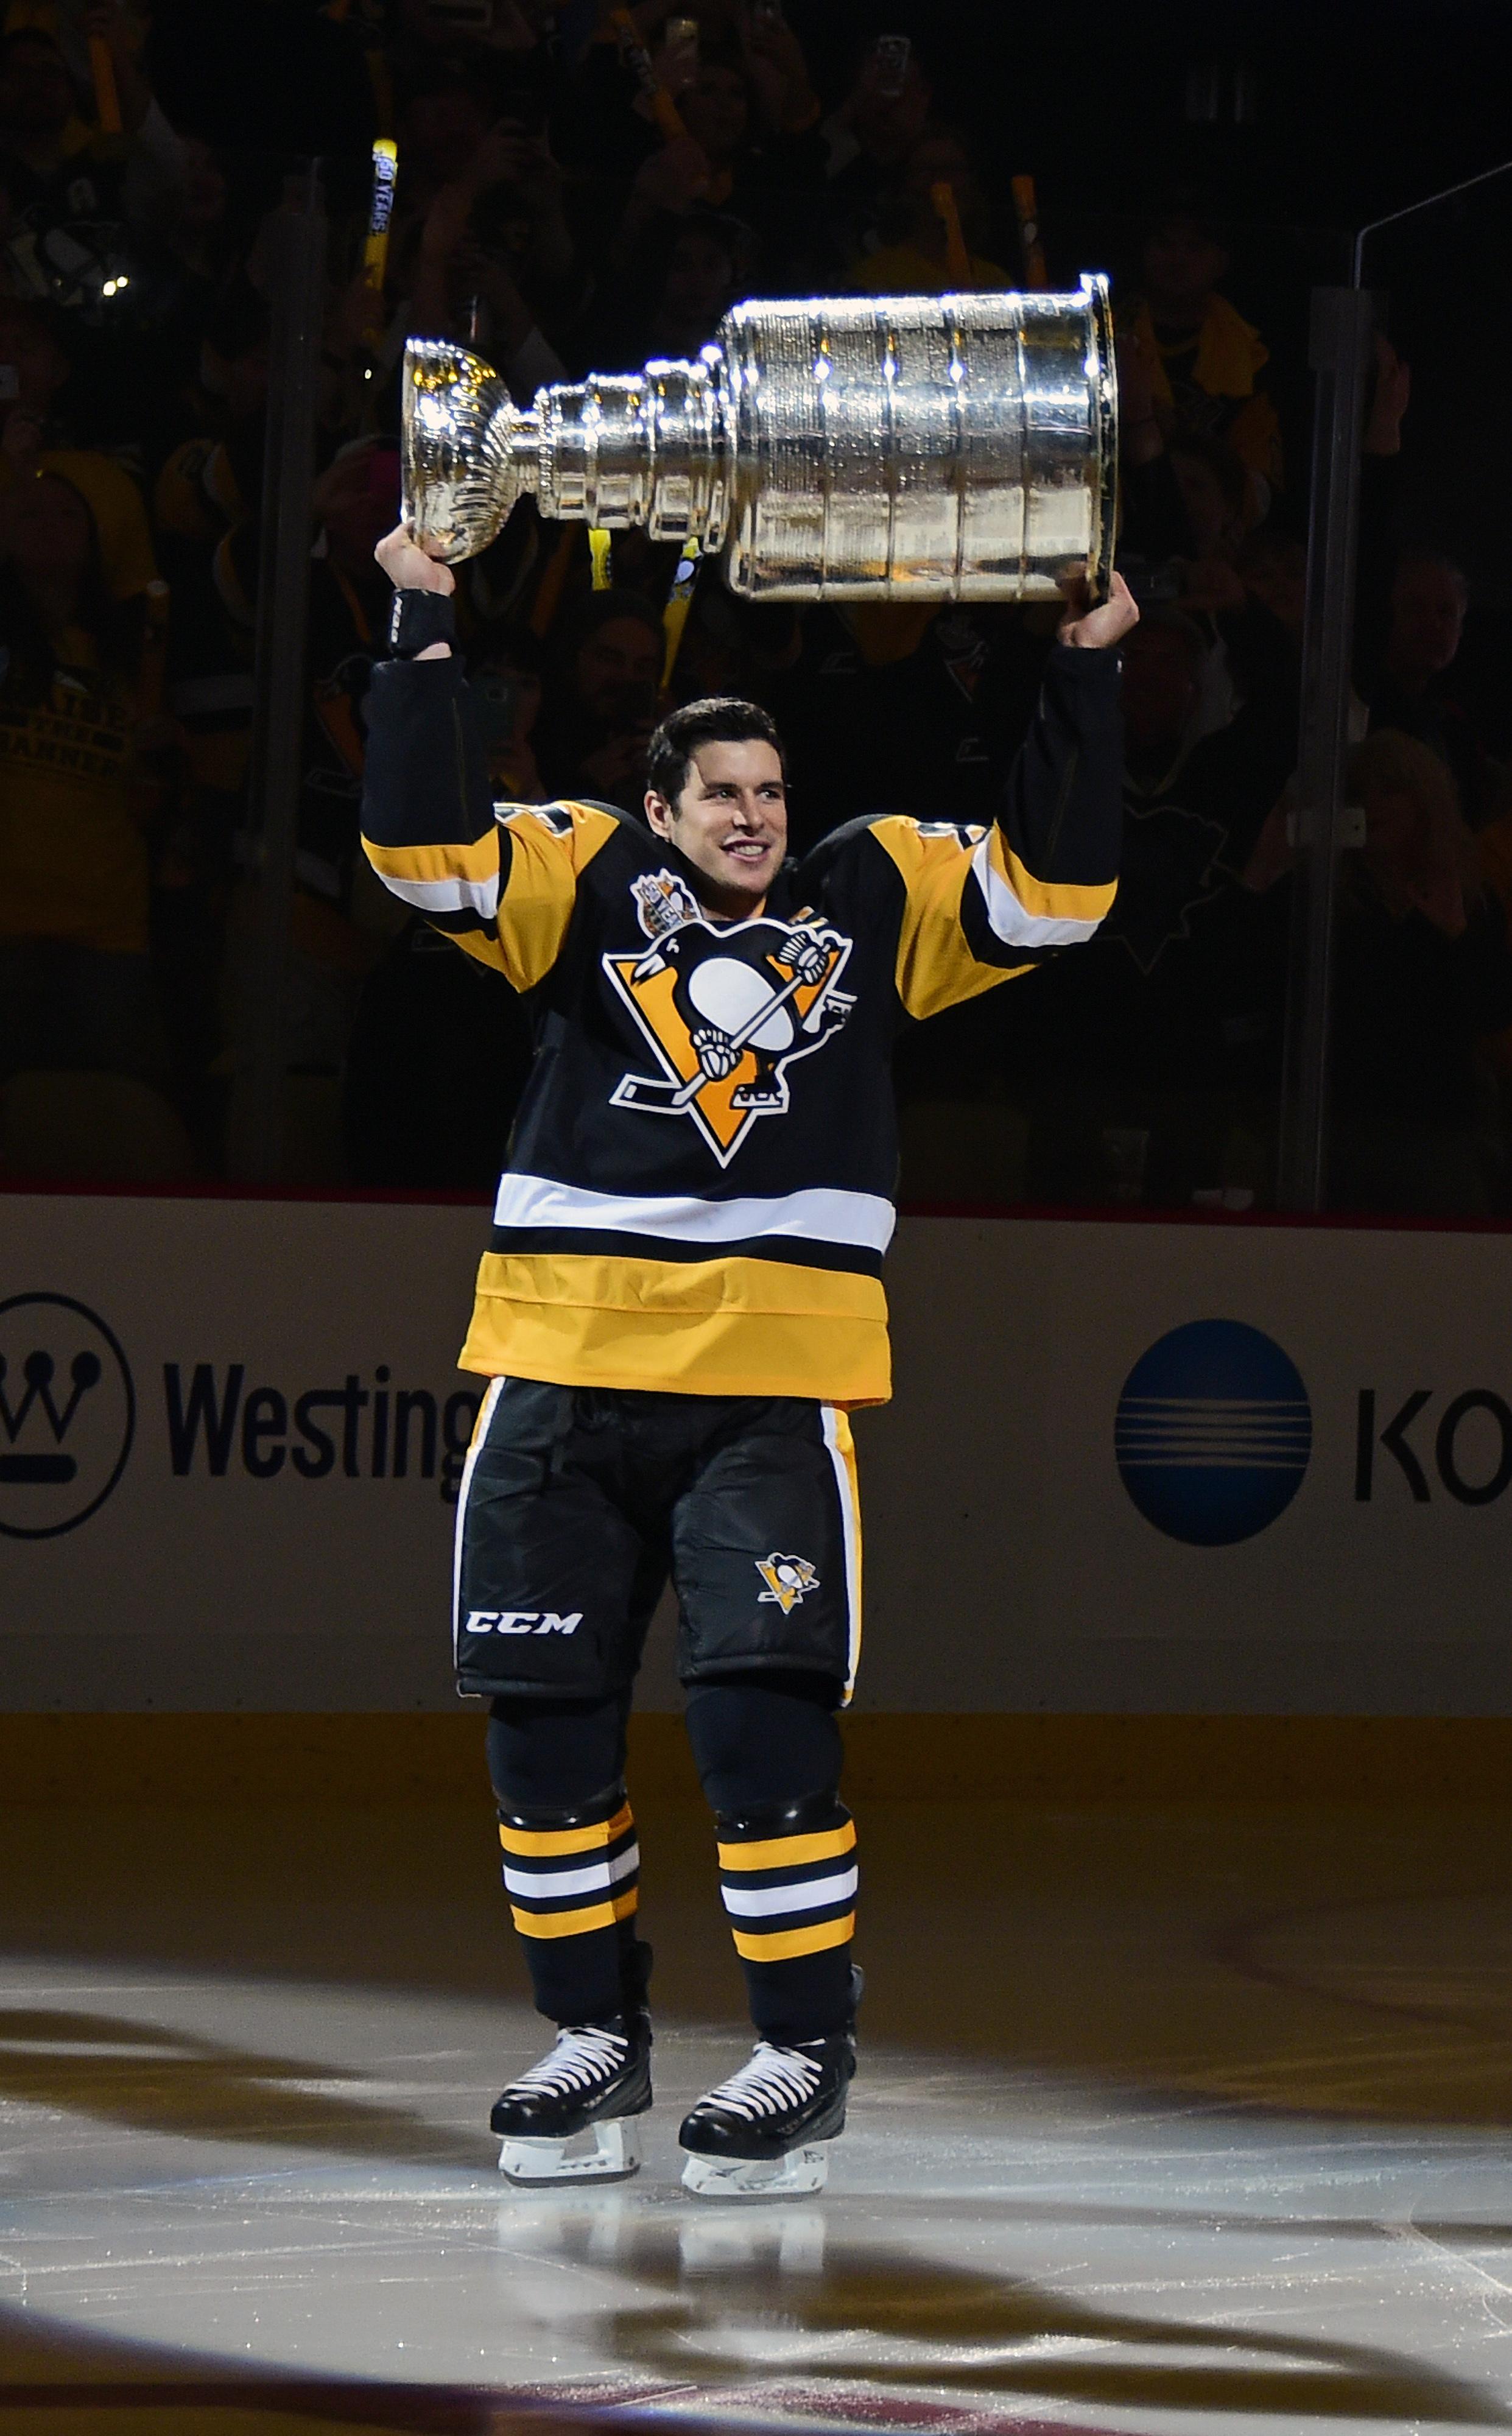 The Pittsburgh Penguins raise their 2016 Stanley Cup Banner inside